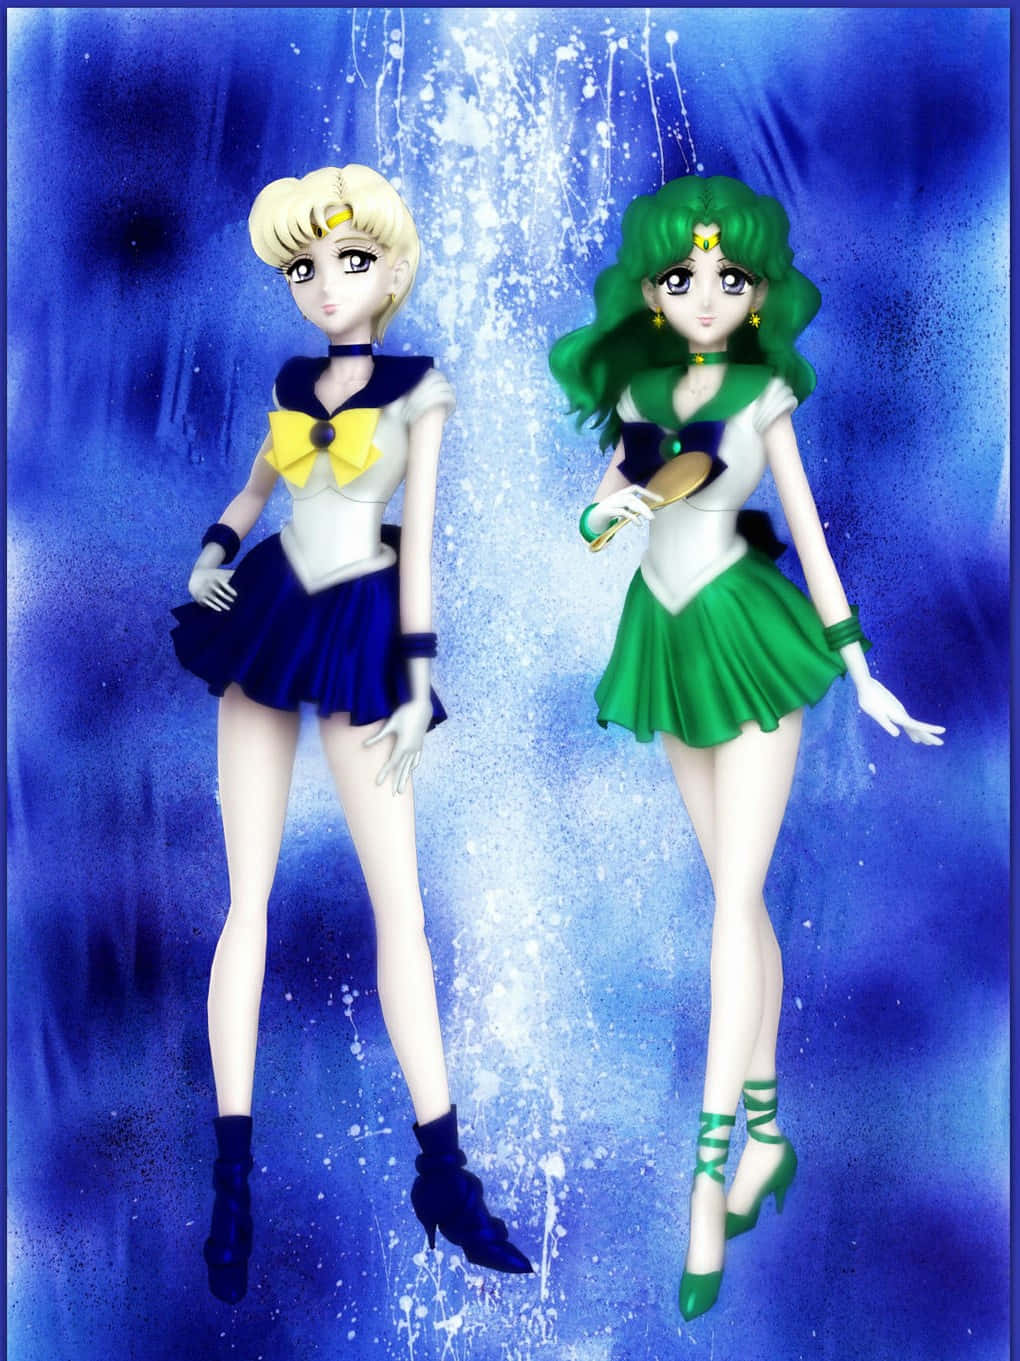 "Sailor Uranus, a fearless Sailor Soldier ready to fight for justice!" Wallpaper